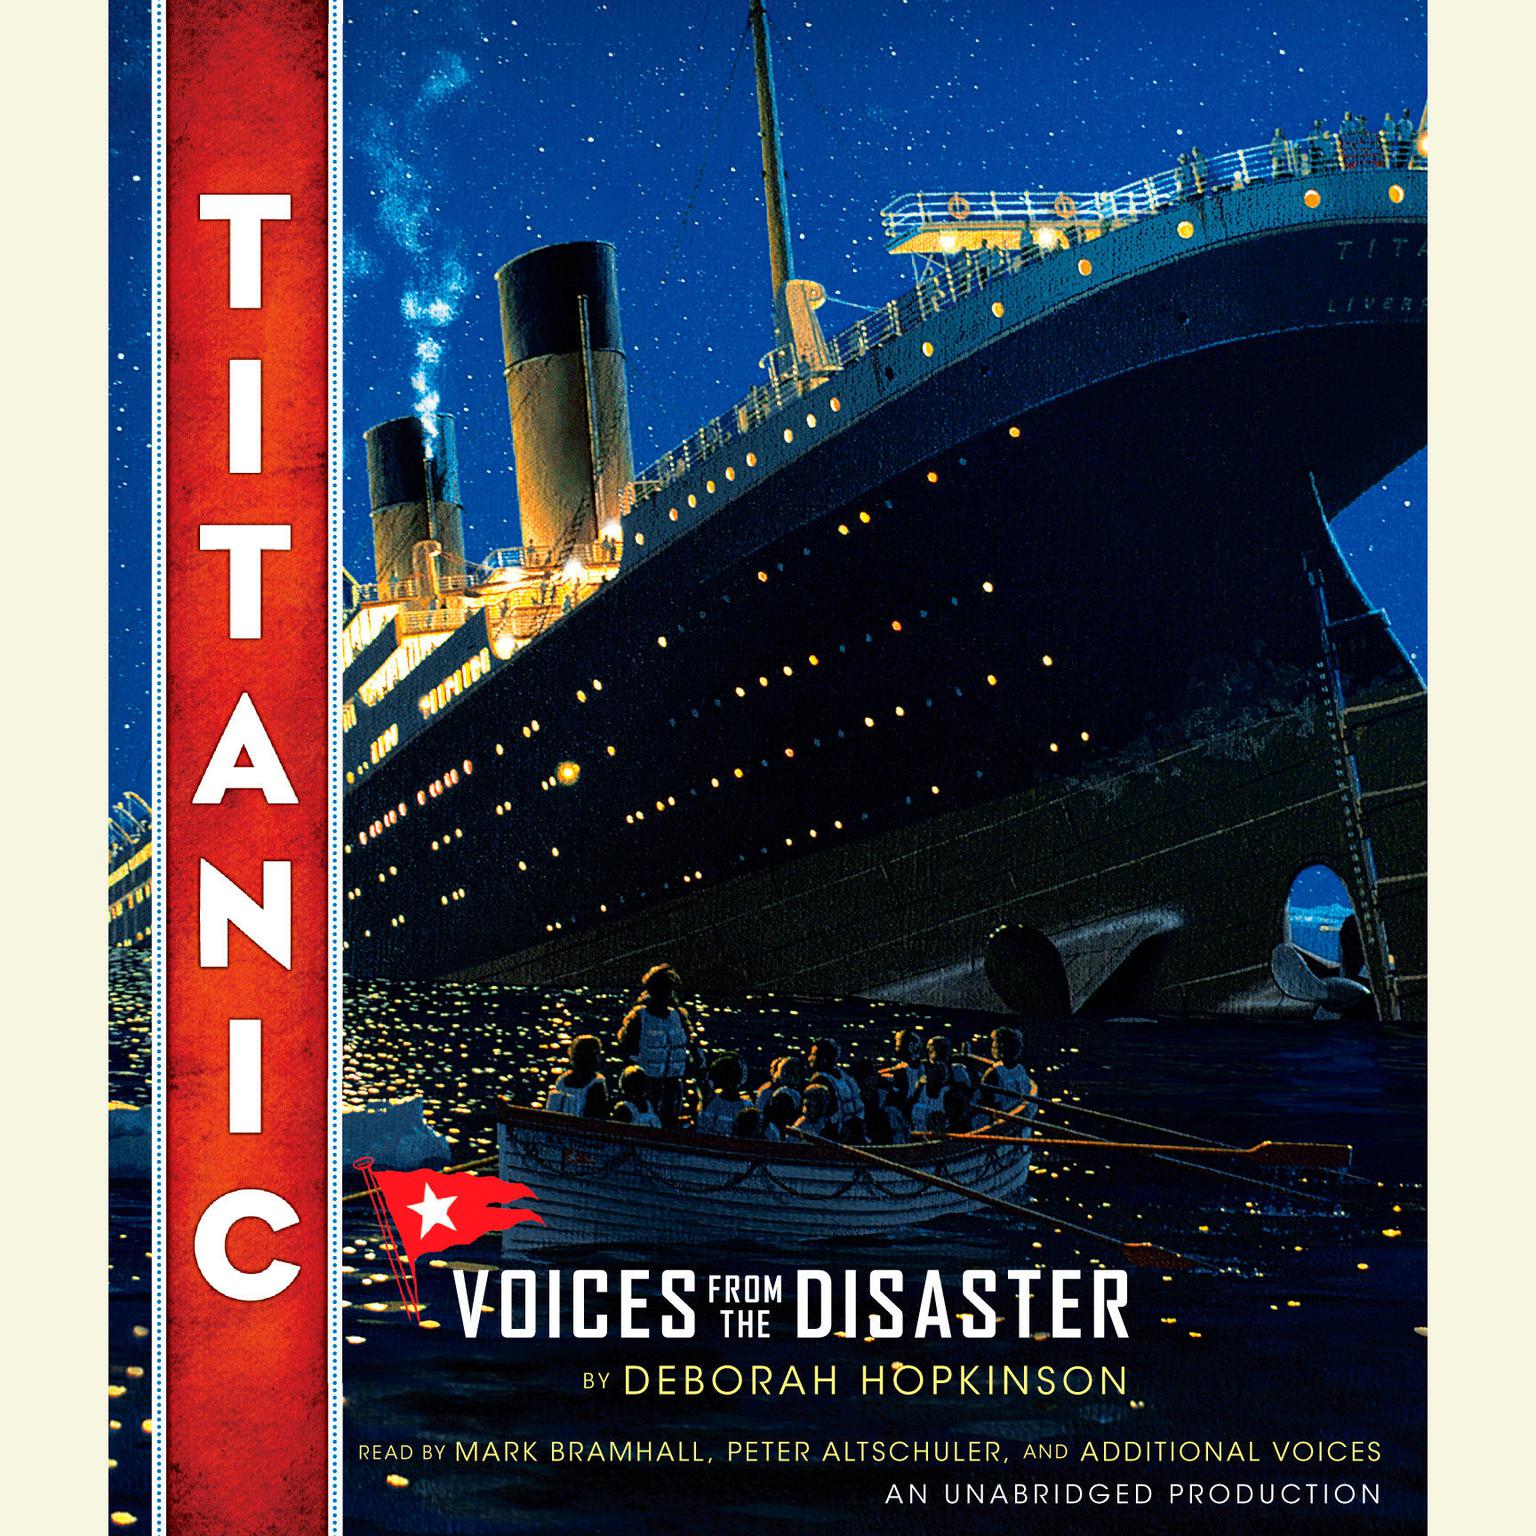 Titanic: Voices From the Disaster: Voices from the Disaster Audiobook, by Deborah Hopkinson